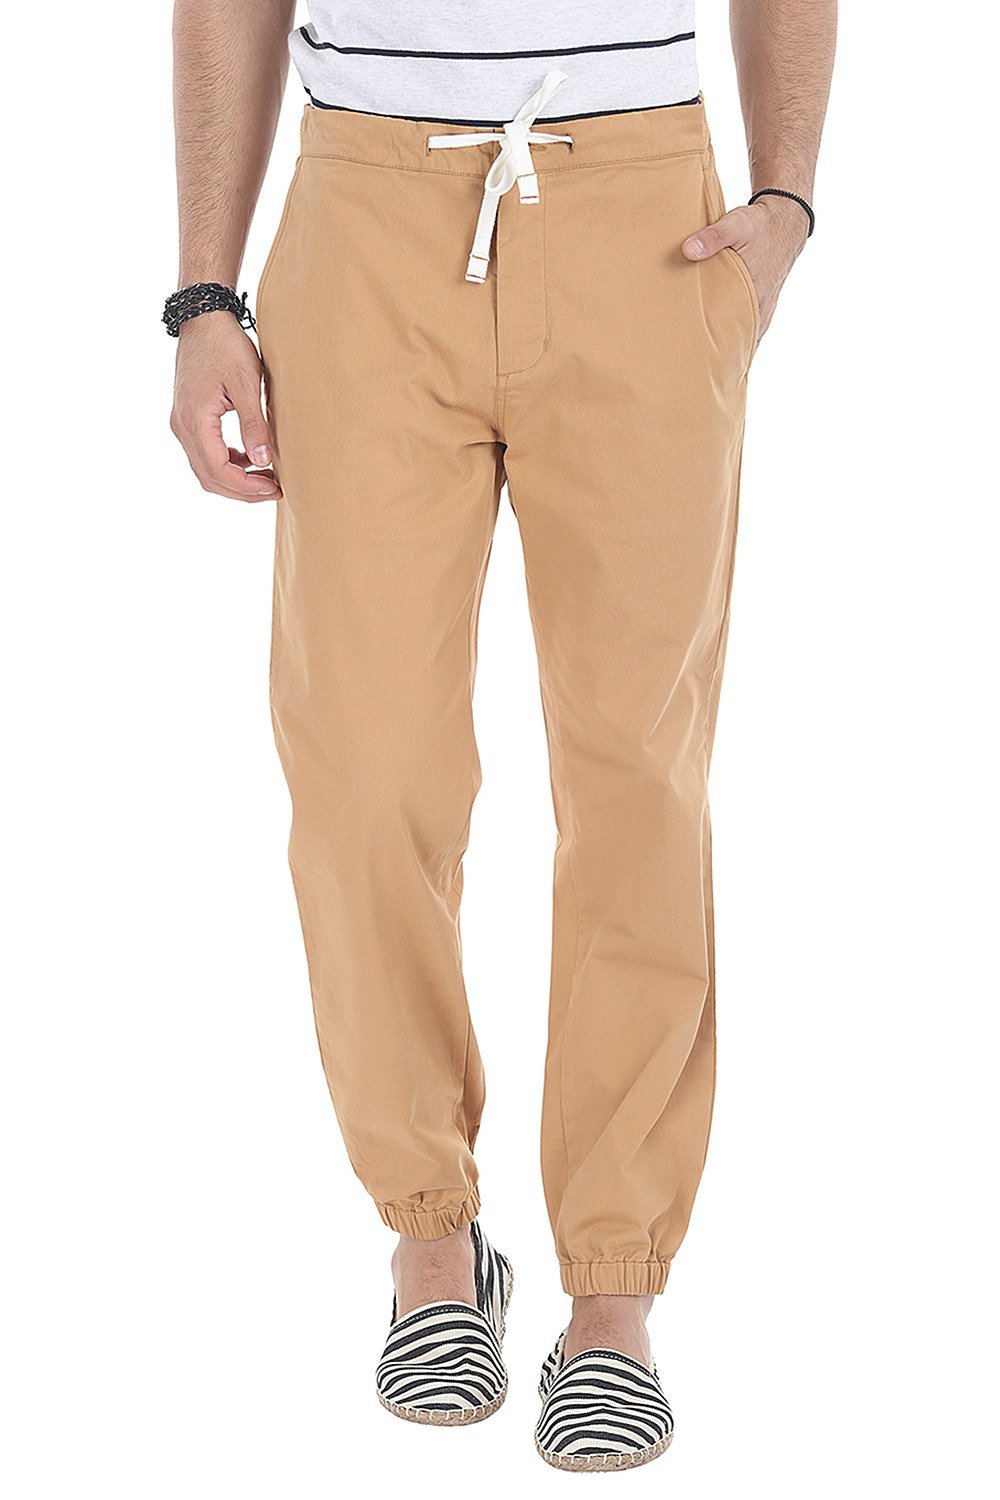 Men's Boulevard Brushed Twill Pant made with Organic Cotton | Pact